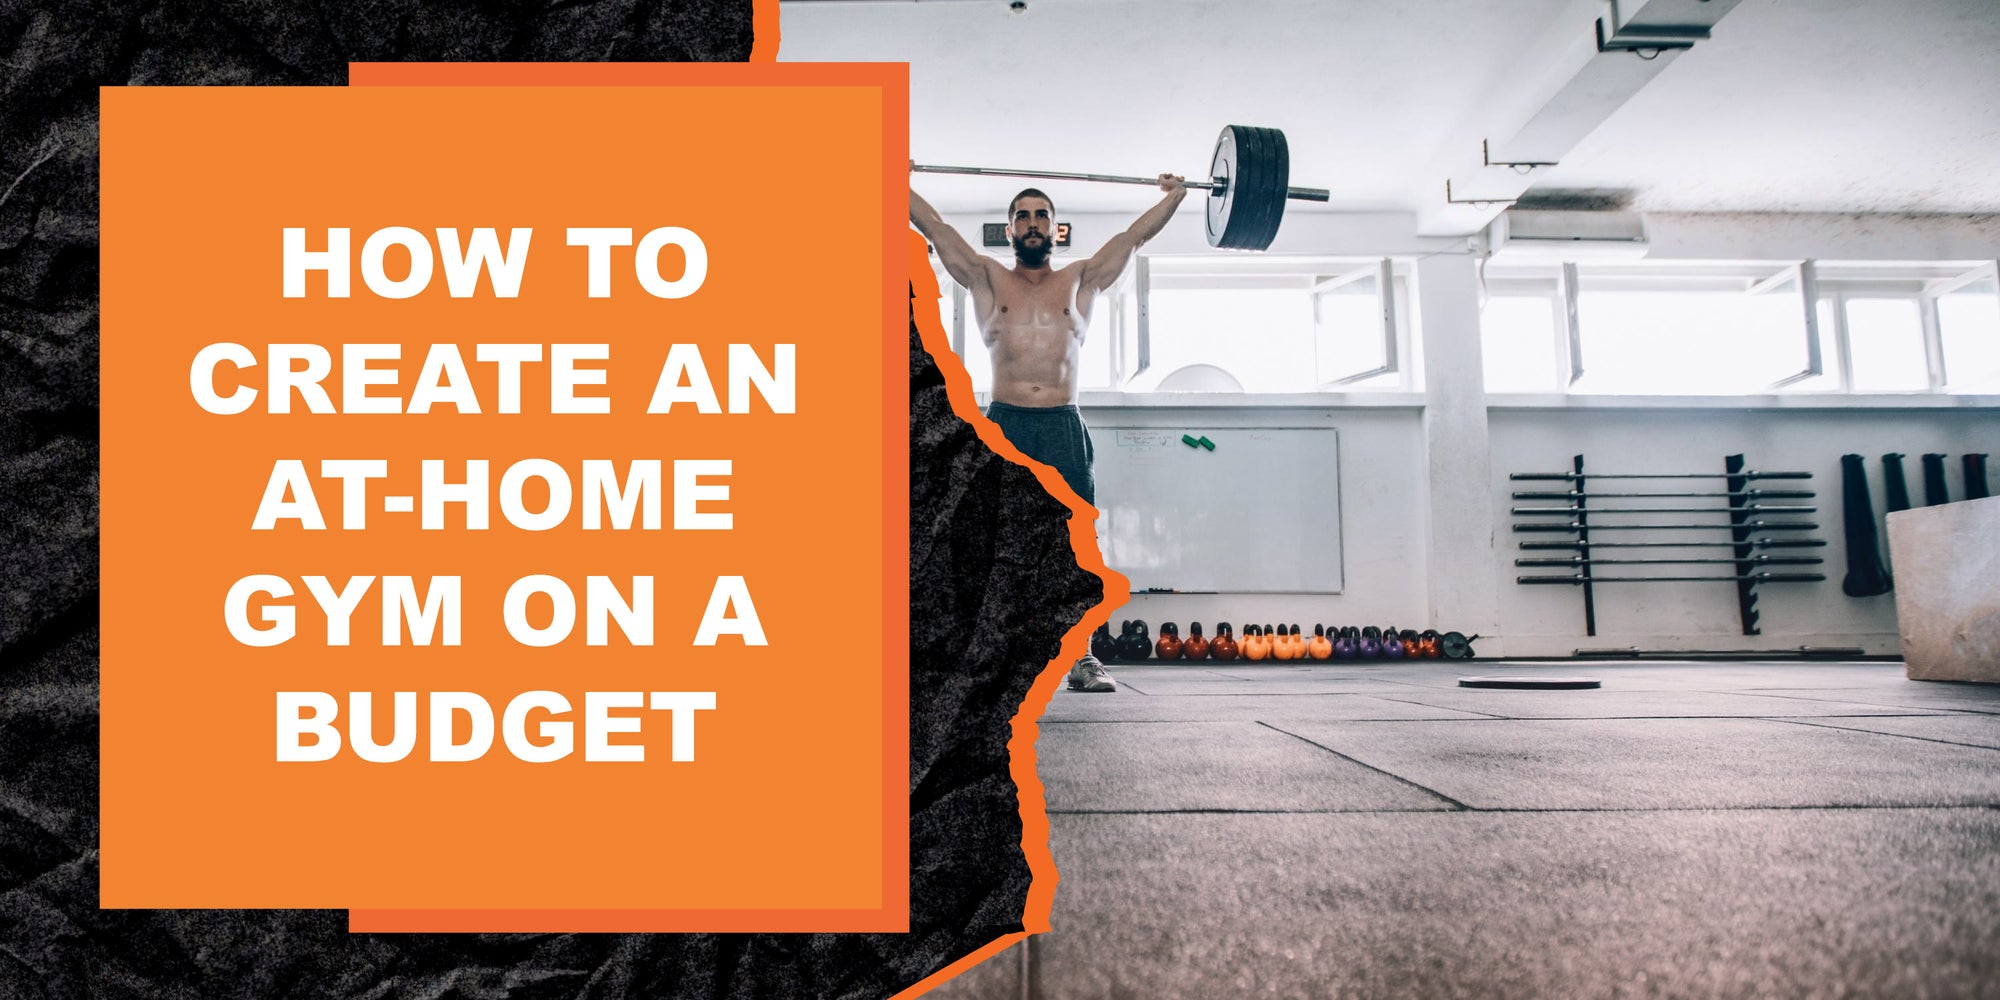 How to Create an At-Home Gym on a Budget